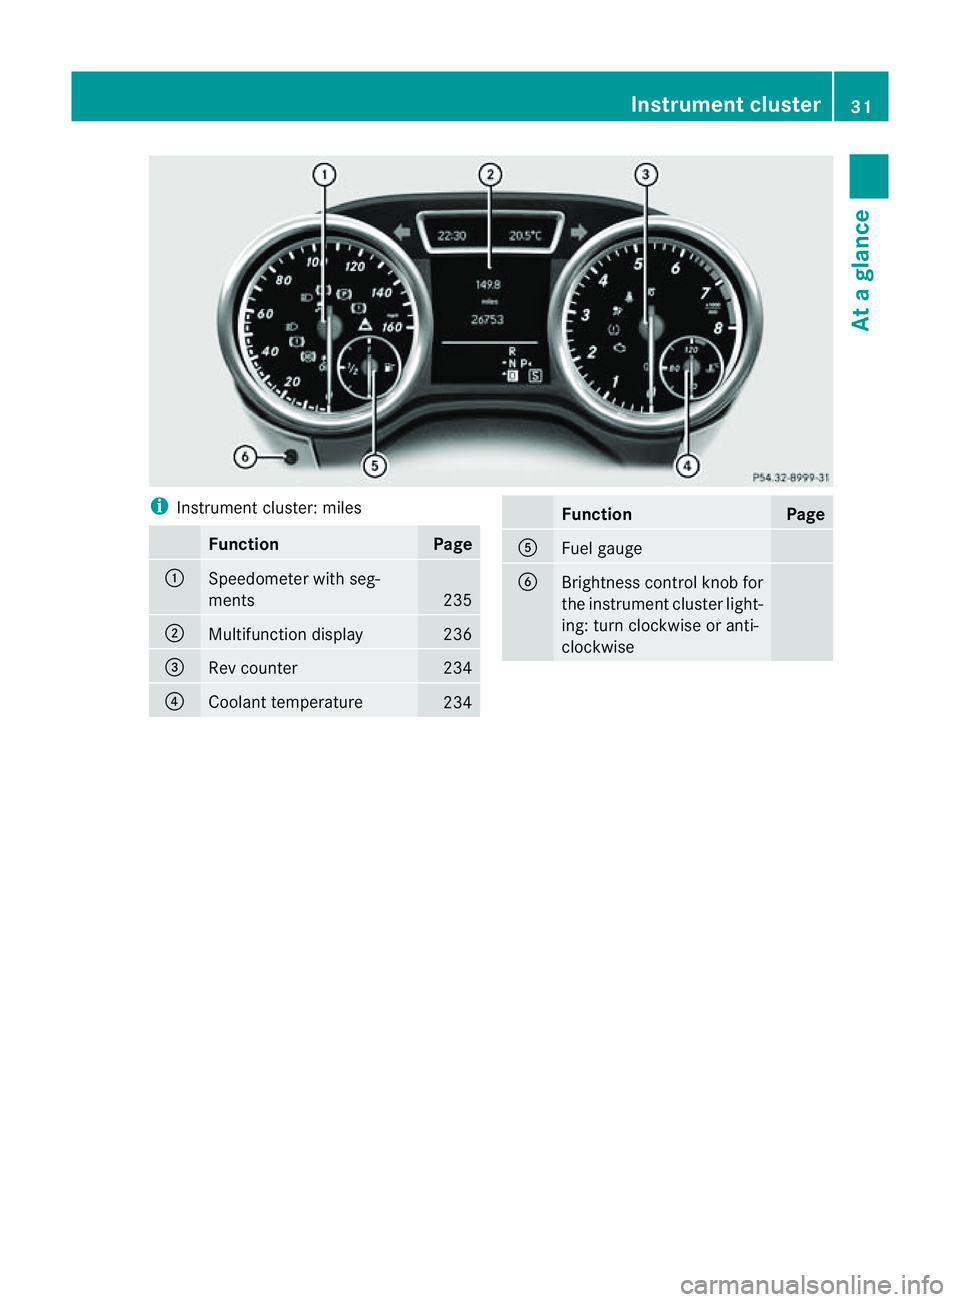 MERCEDES-BENZ M-CLASS SUV 2011  Owners Manual i
Instrument cluster: miles Fun
ction Page
:
Speedometer with seg-
ments
235
;
Multifunctio
ndisplay 236
=
Rev counter 234
?
Coolant temperature
234 Function Page
A
Fuel gauge
B
Brightness control kno